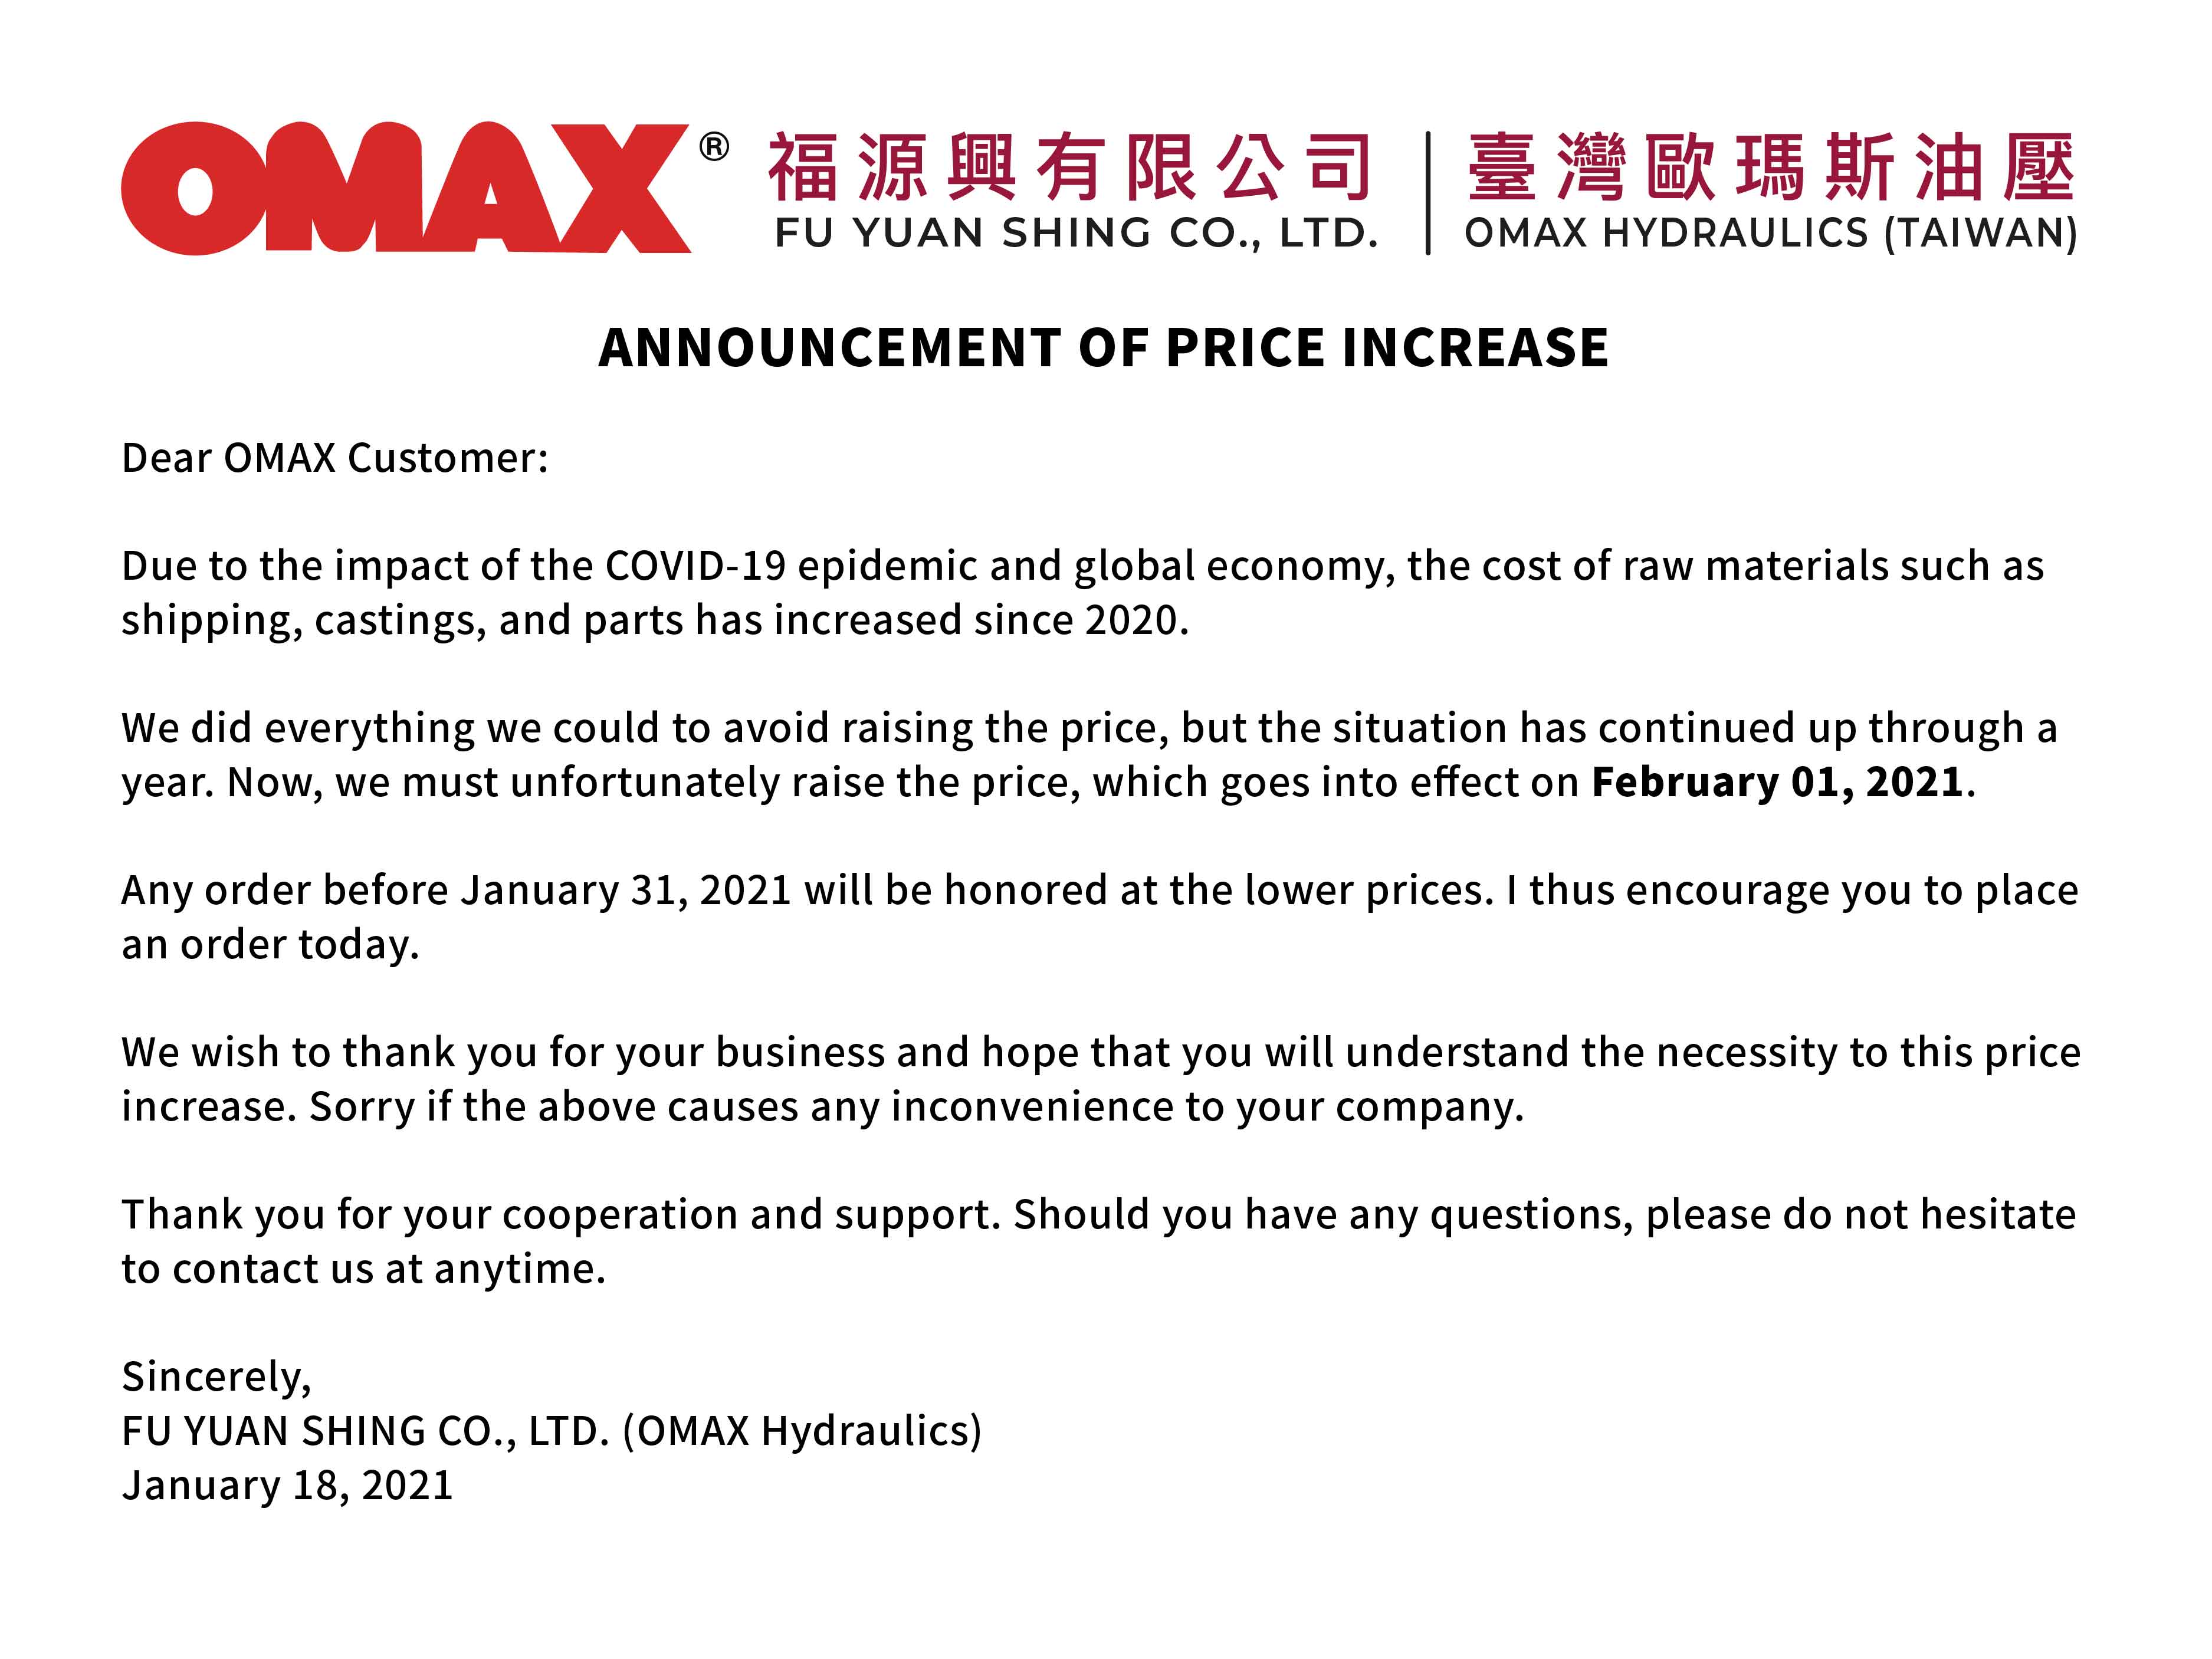 Announcement of Price Increase